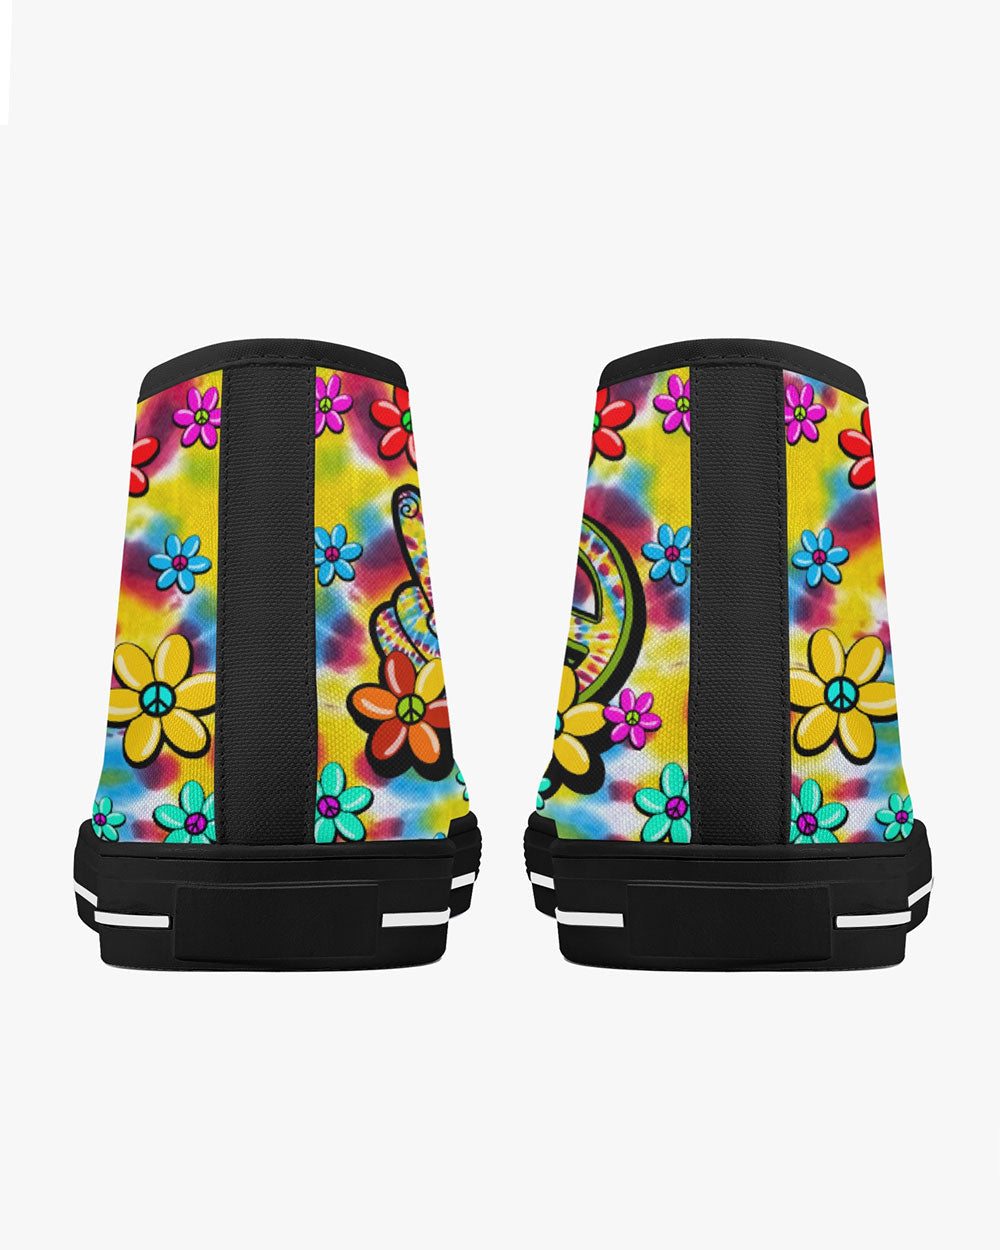 HIPPIE PEACE LOVE FLOWERS TIE DYE HIGH TOP CANVAS SHOES - TY0406245